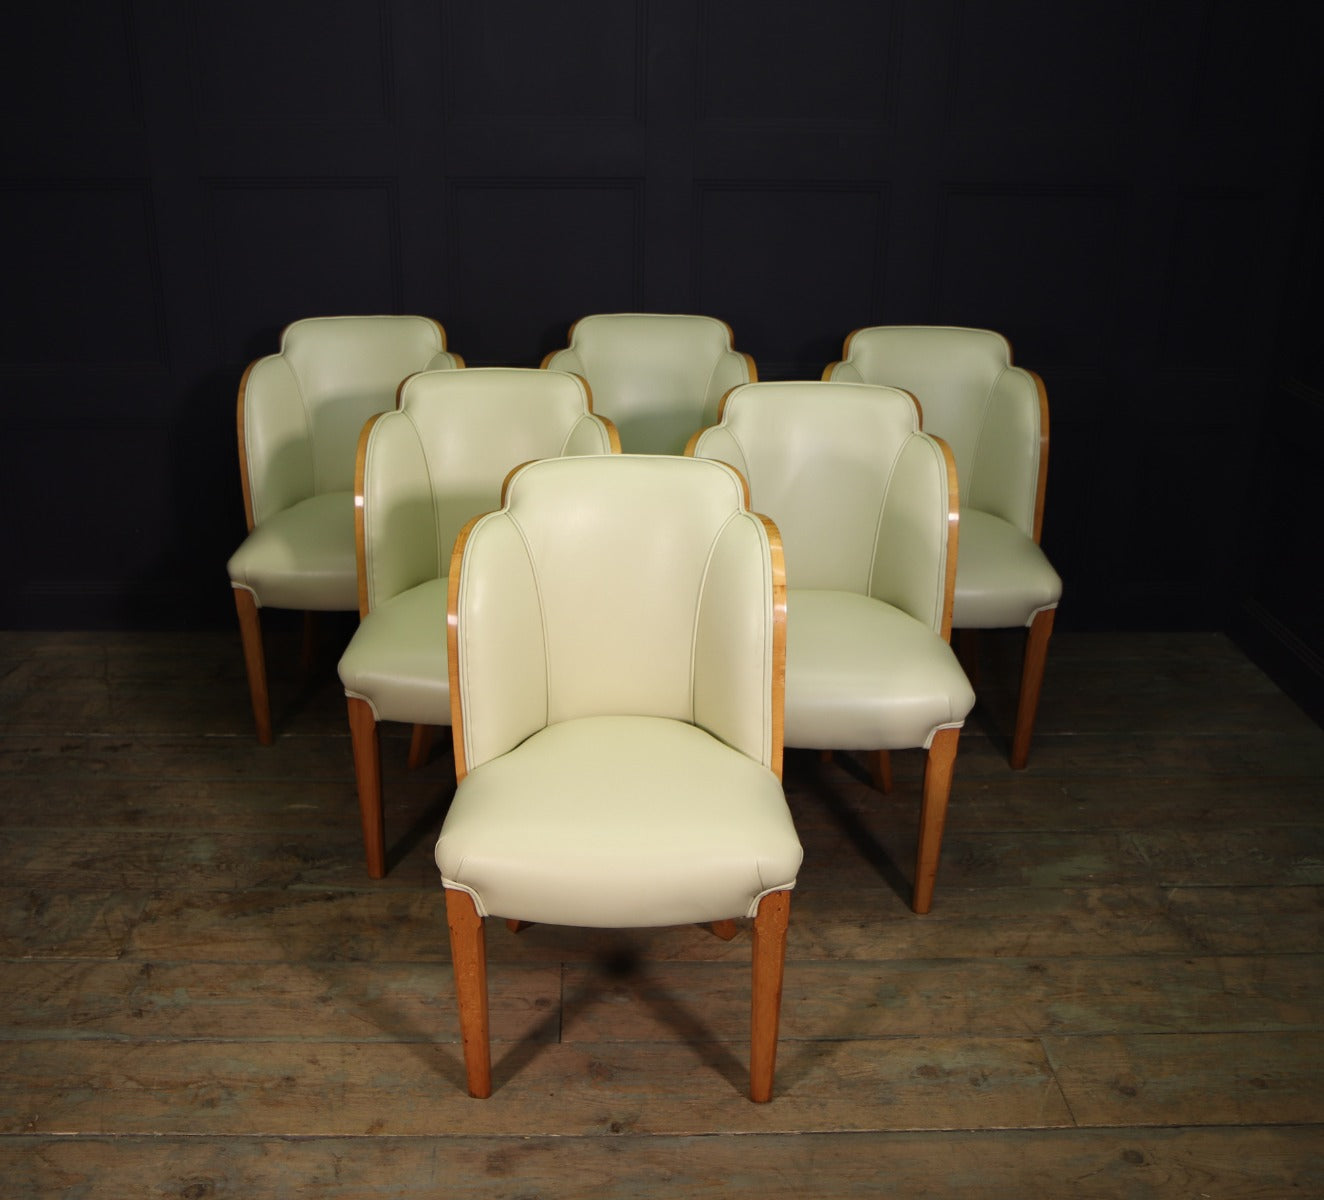 Original art deco dining chairs by Epstein